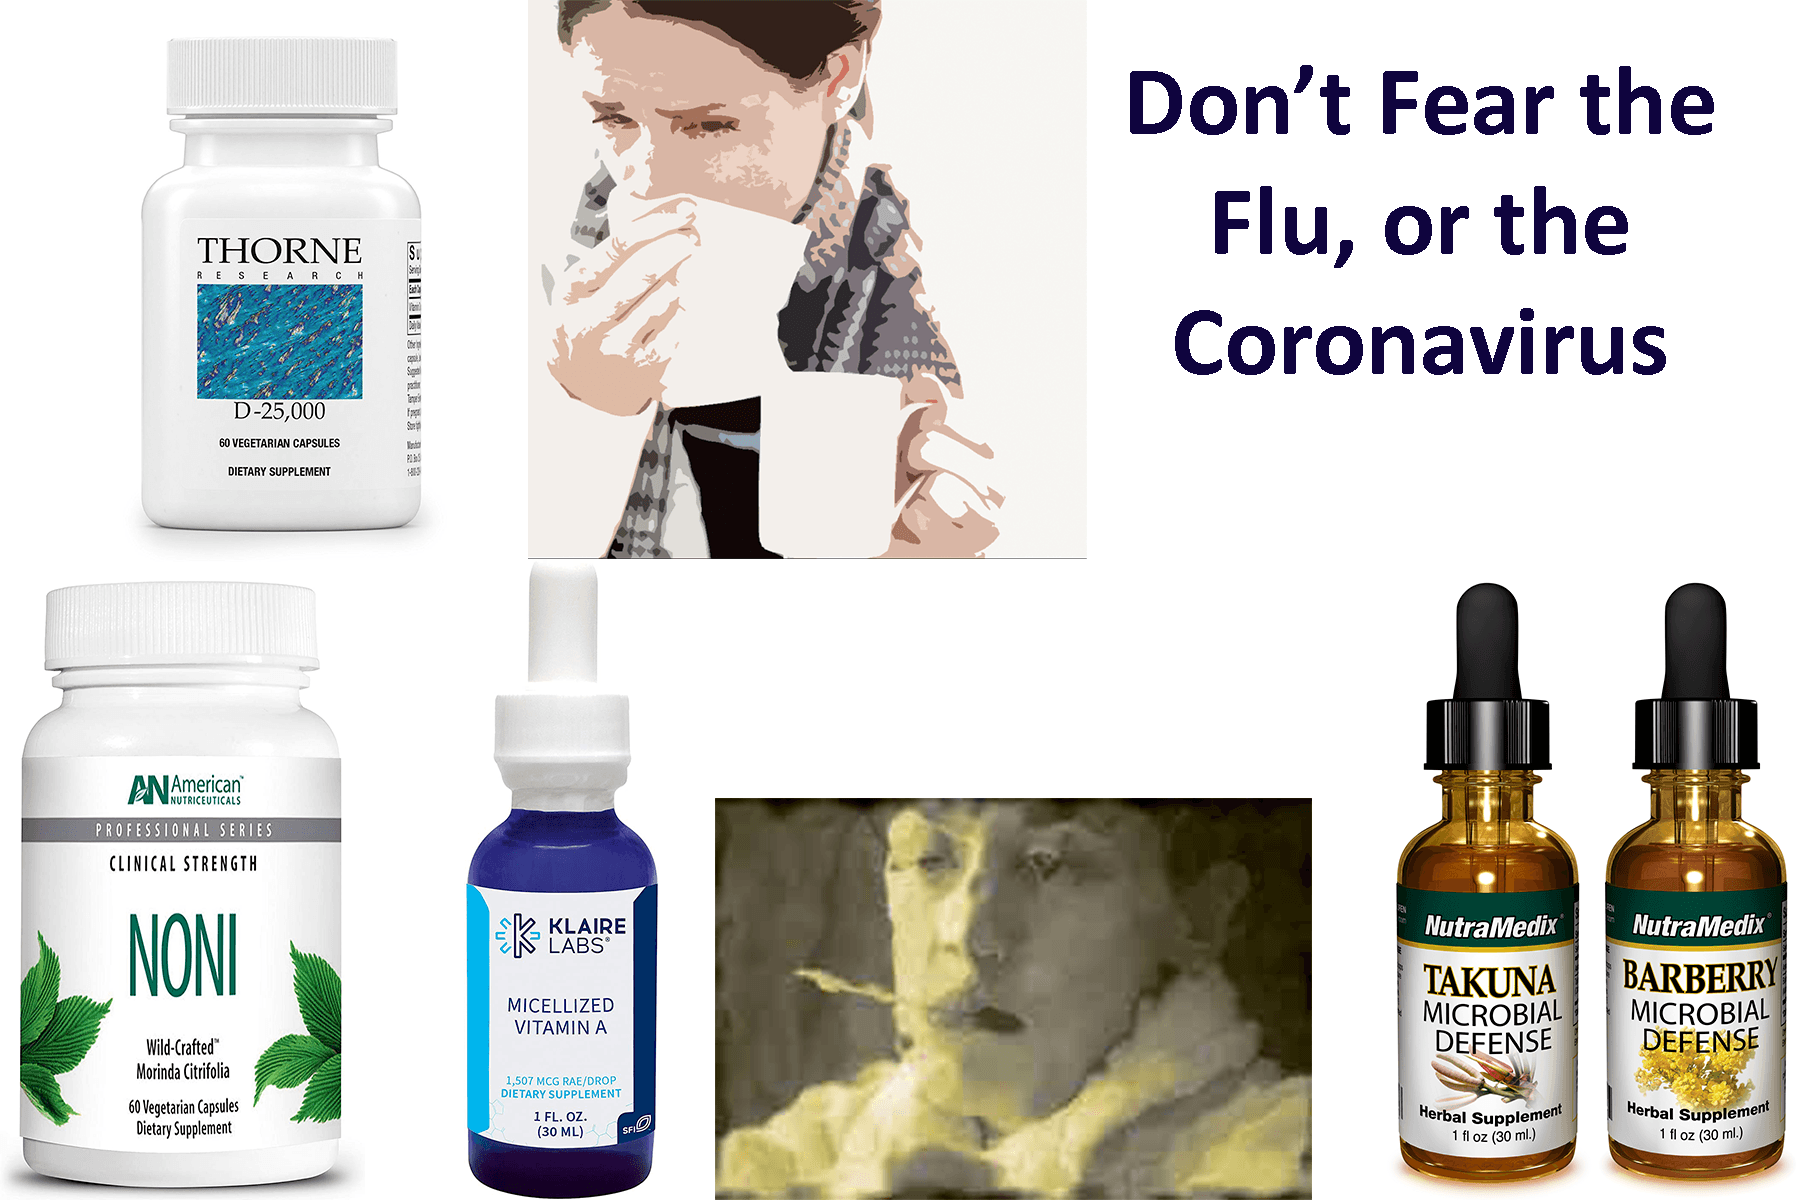 Don't Fear the Flu Products